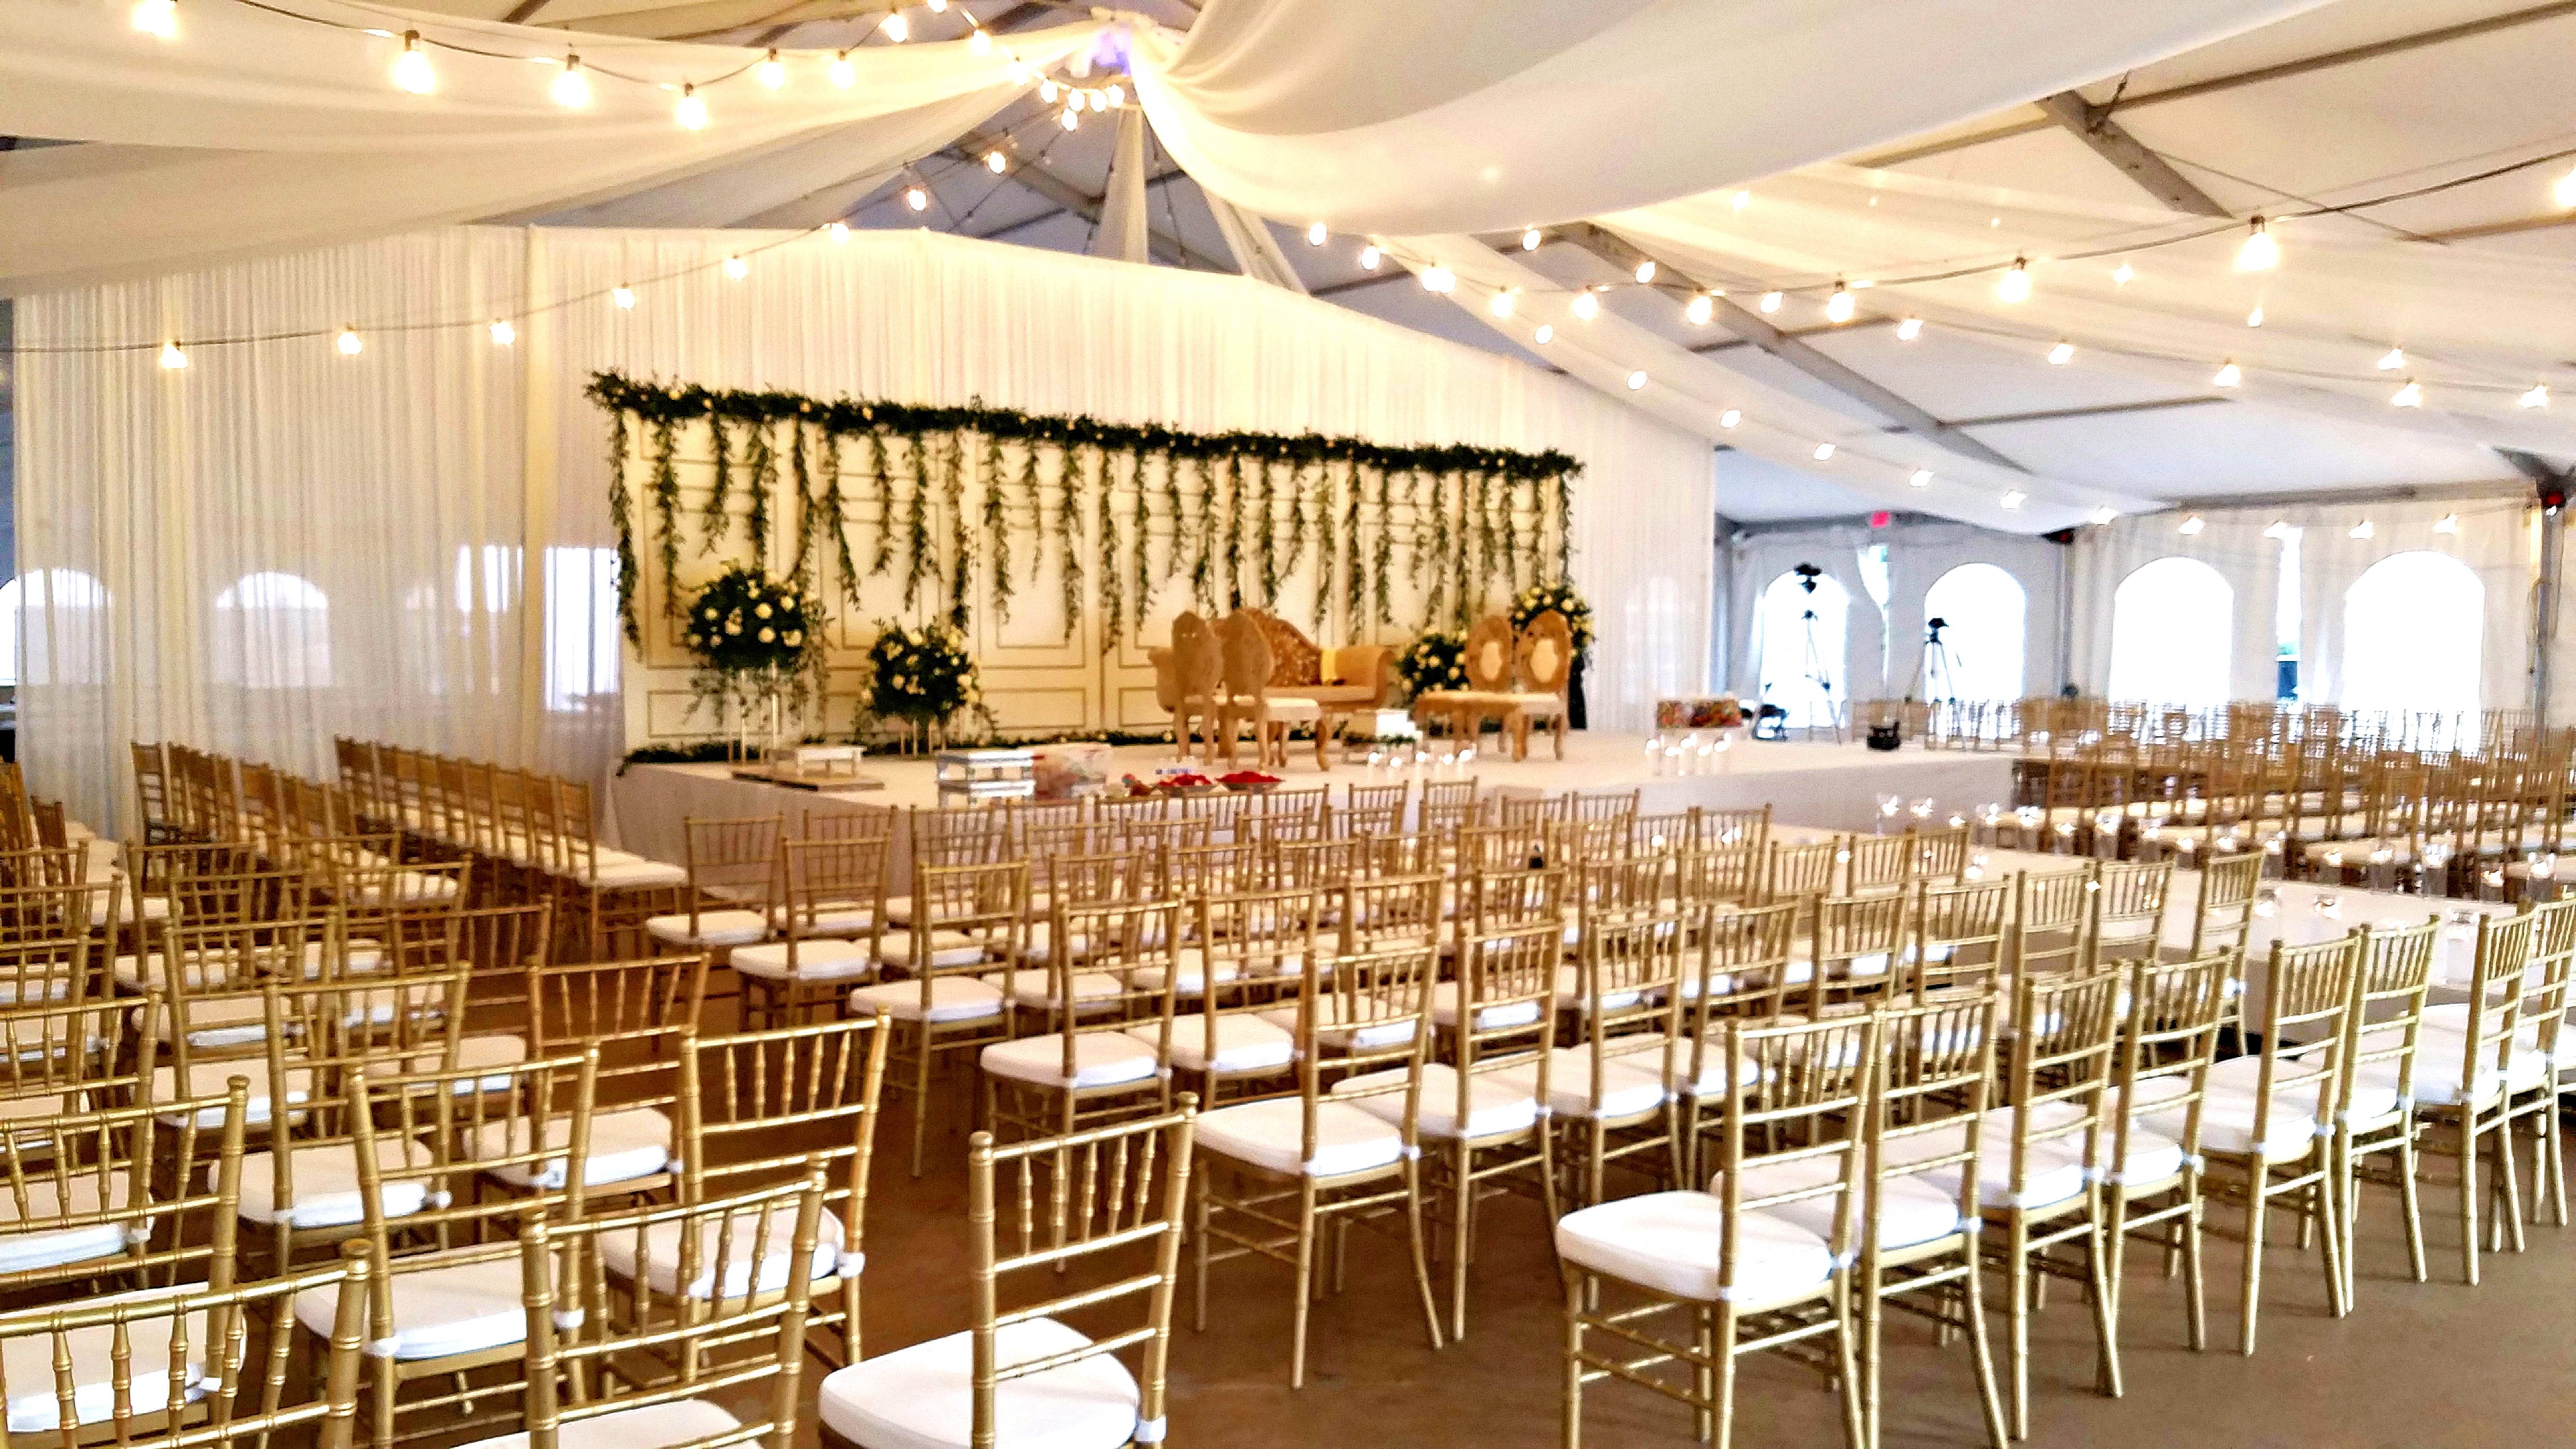 Wedding Reception Tent Setup with Rows of Chairs and Stage Area